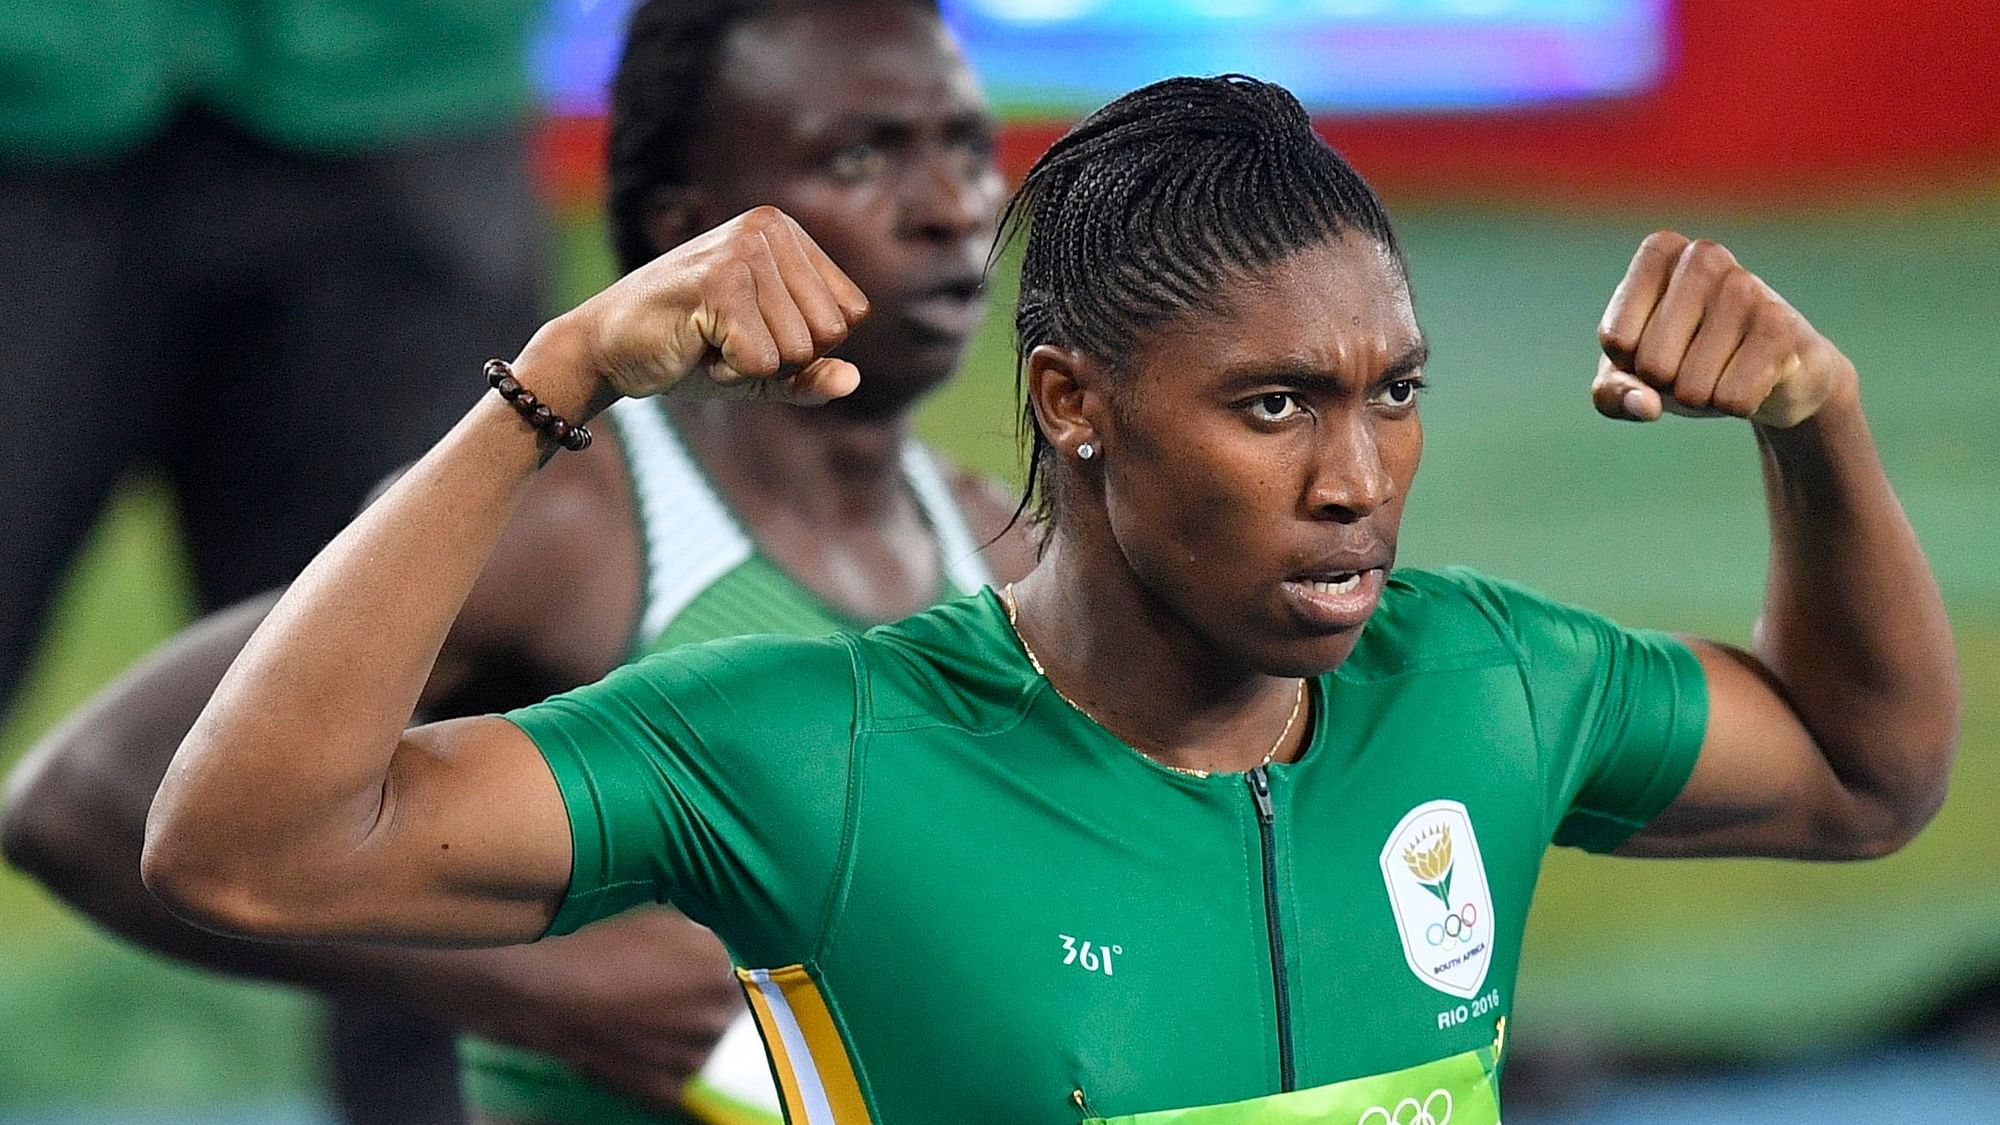 Caster Semenya has filed an appeal in the CAS against the IAAF ruling forcing female runners to medicate to reduce their testosterone levels for six months before racing internationally.